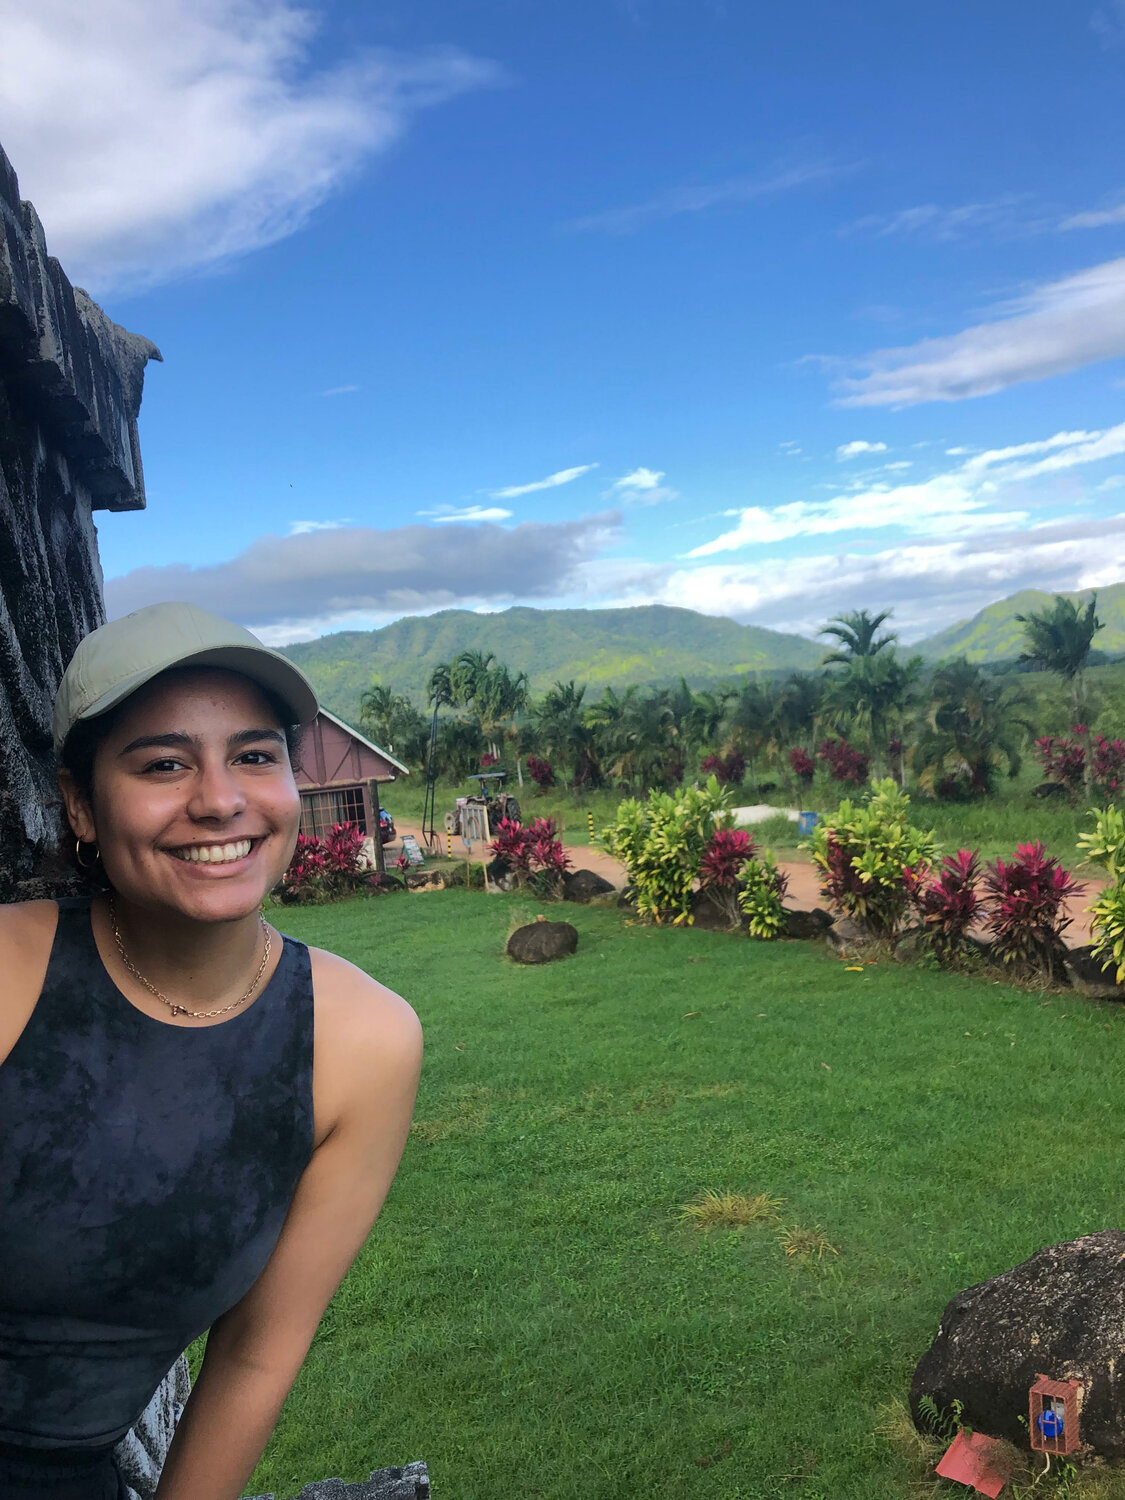 Traveling to places like Belize has challenged Talia McWright's storytelling and writing abilities, and allowed her to experience the world in new ways. (Photo submitted)